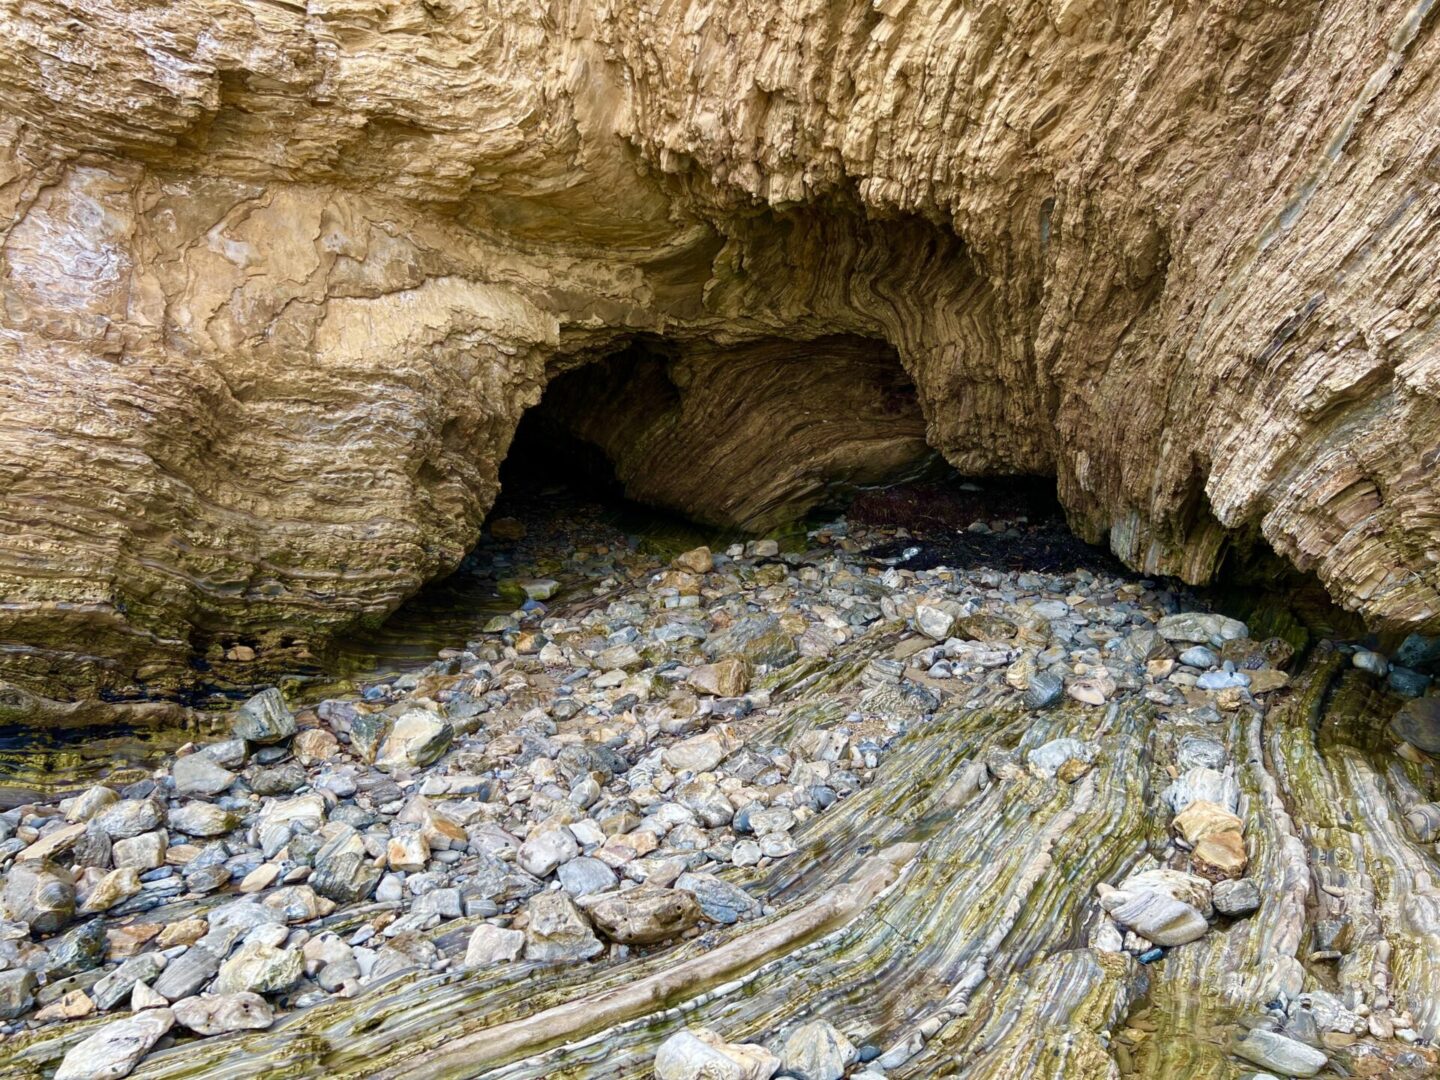 A rock cave with rocks and grass in the foreground.